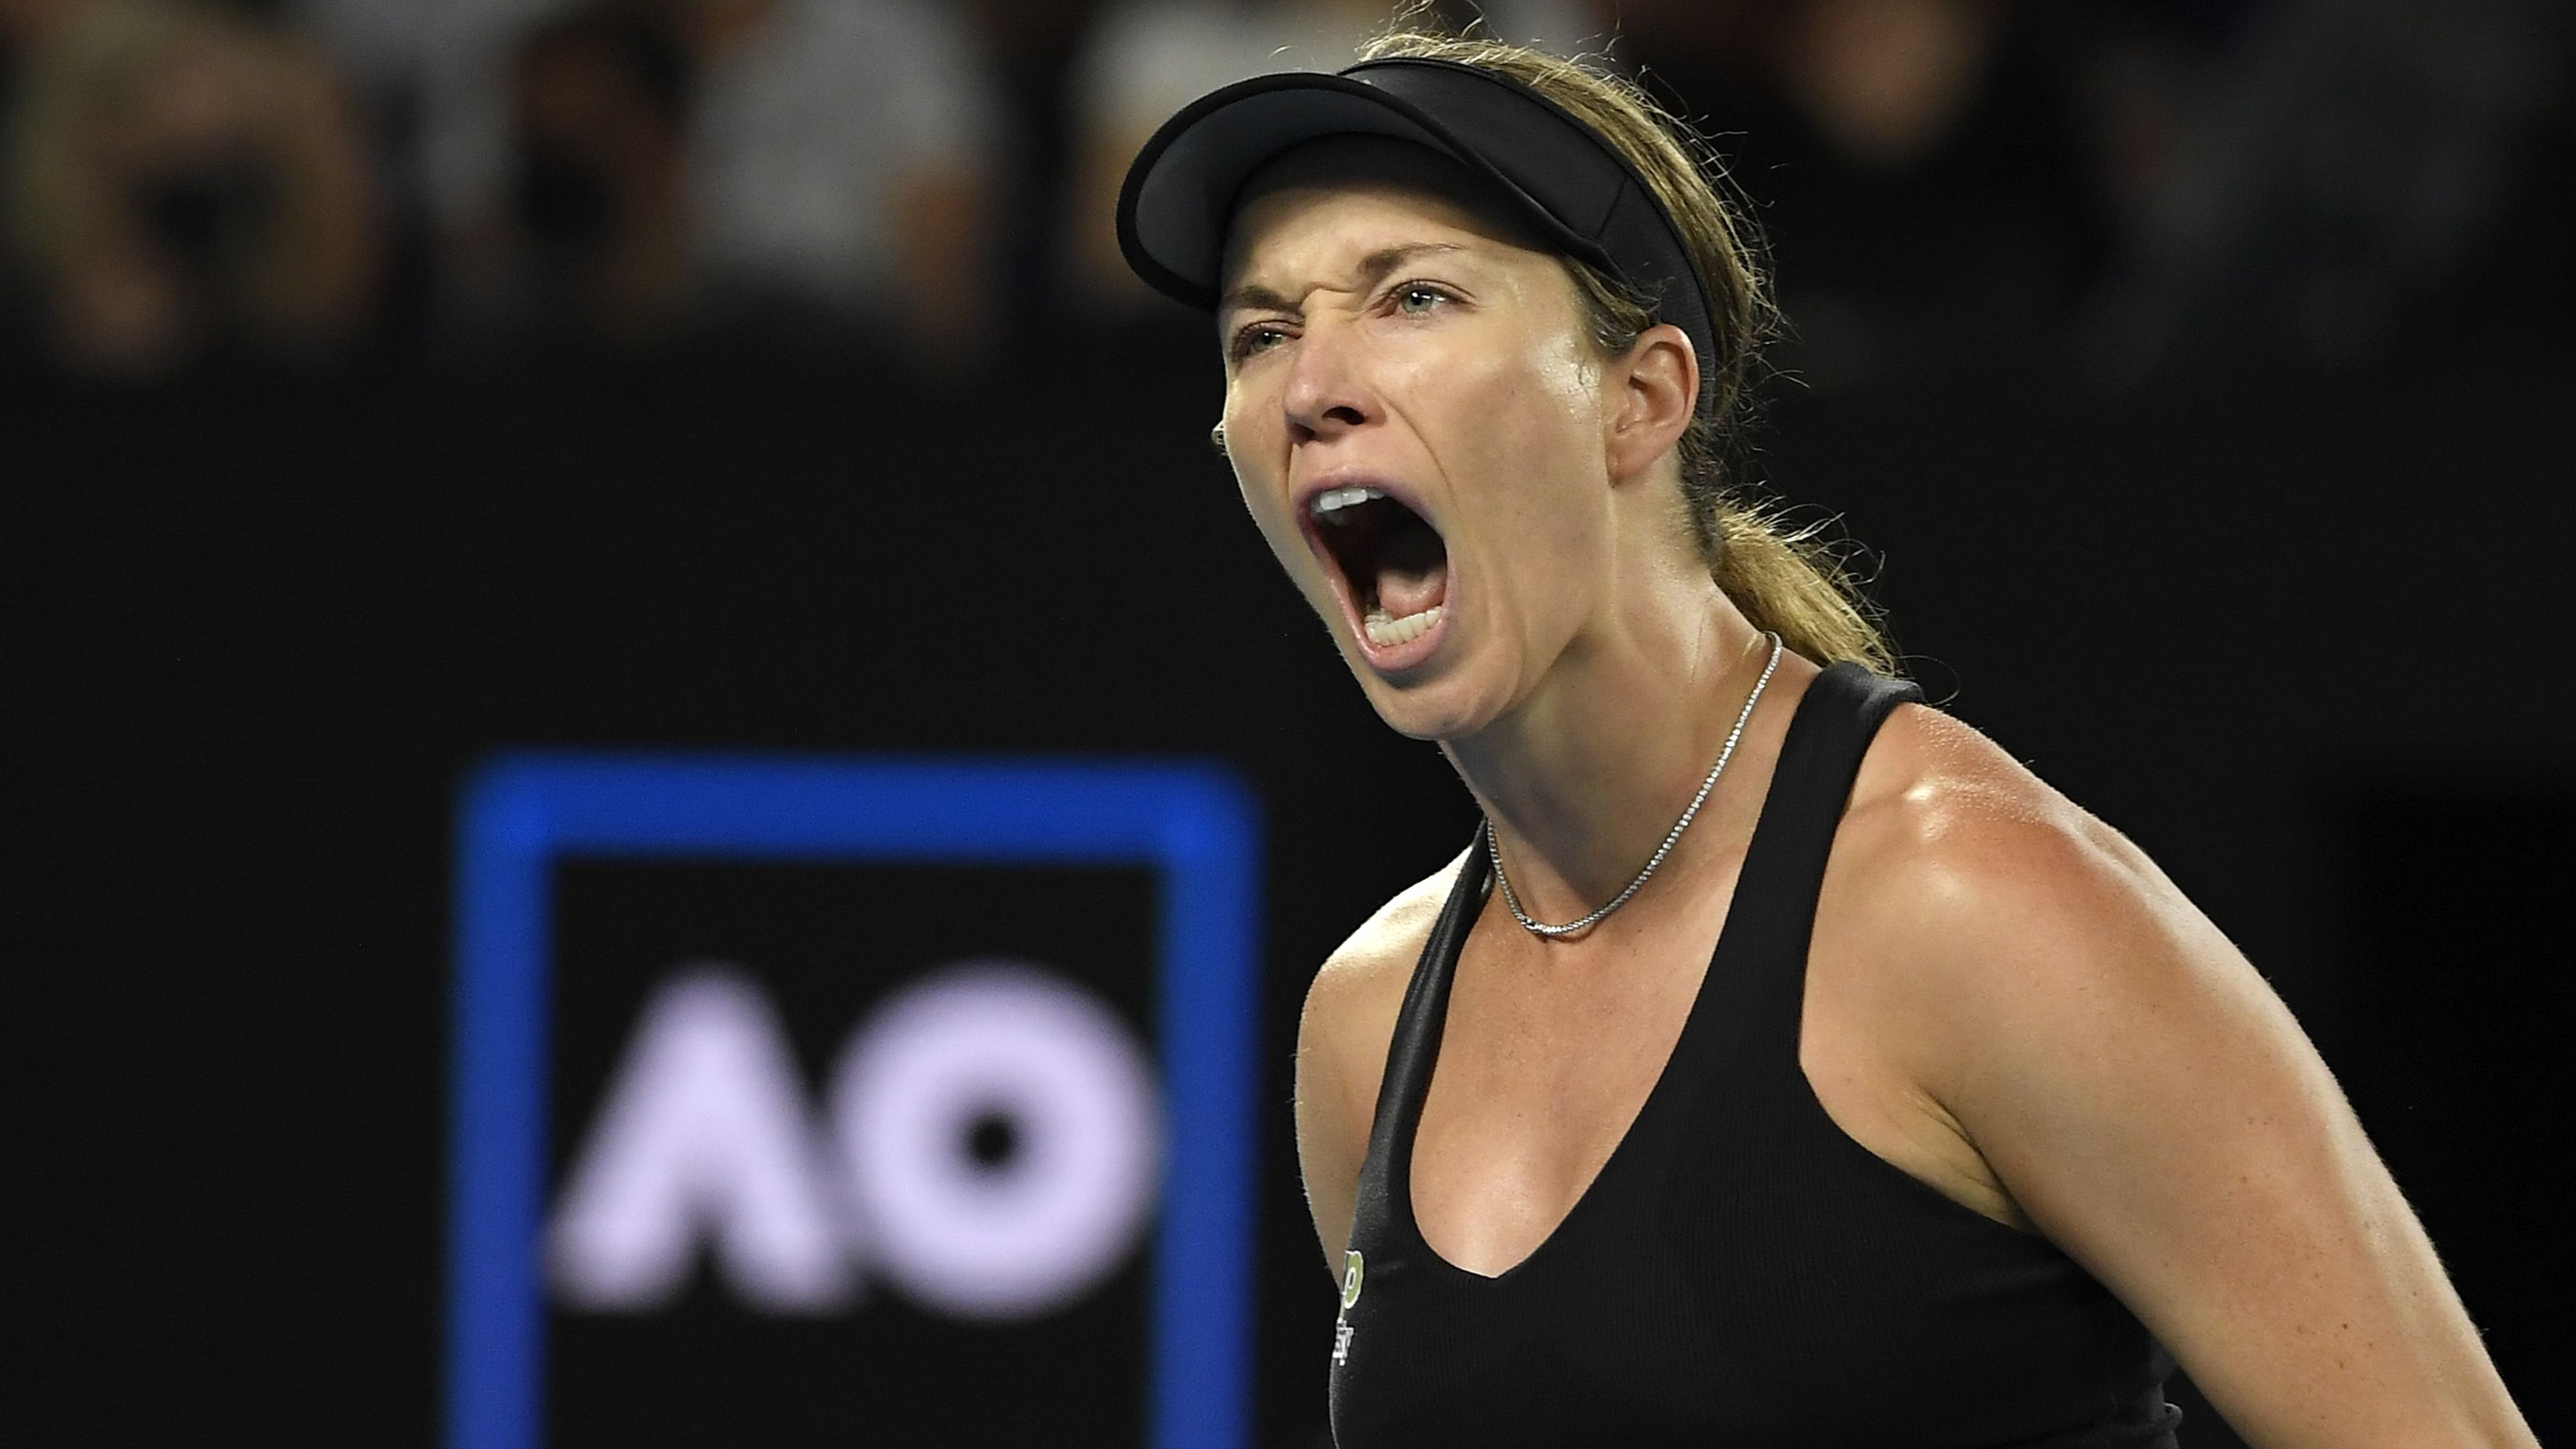 Danielle Collins blows up at crowd, delivers classy losing speech in rollercoaster Australian Open final